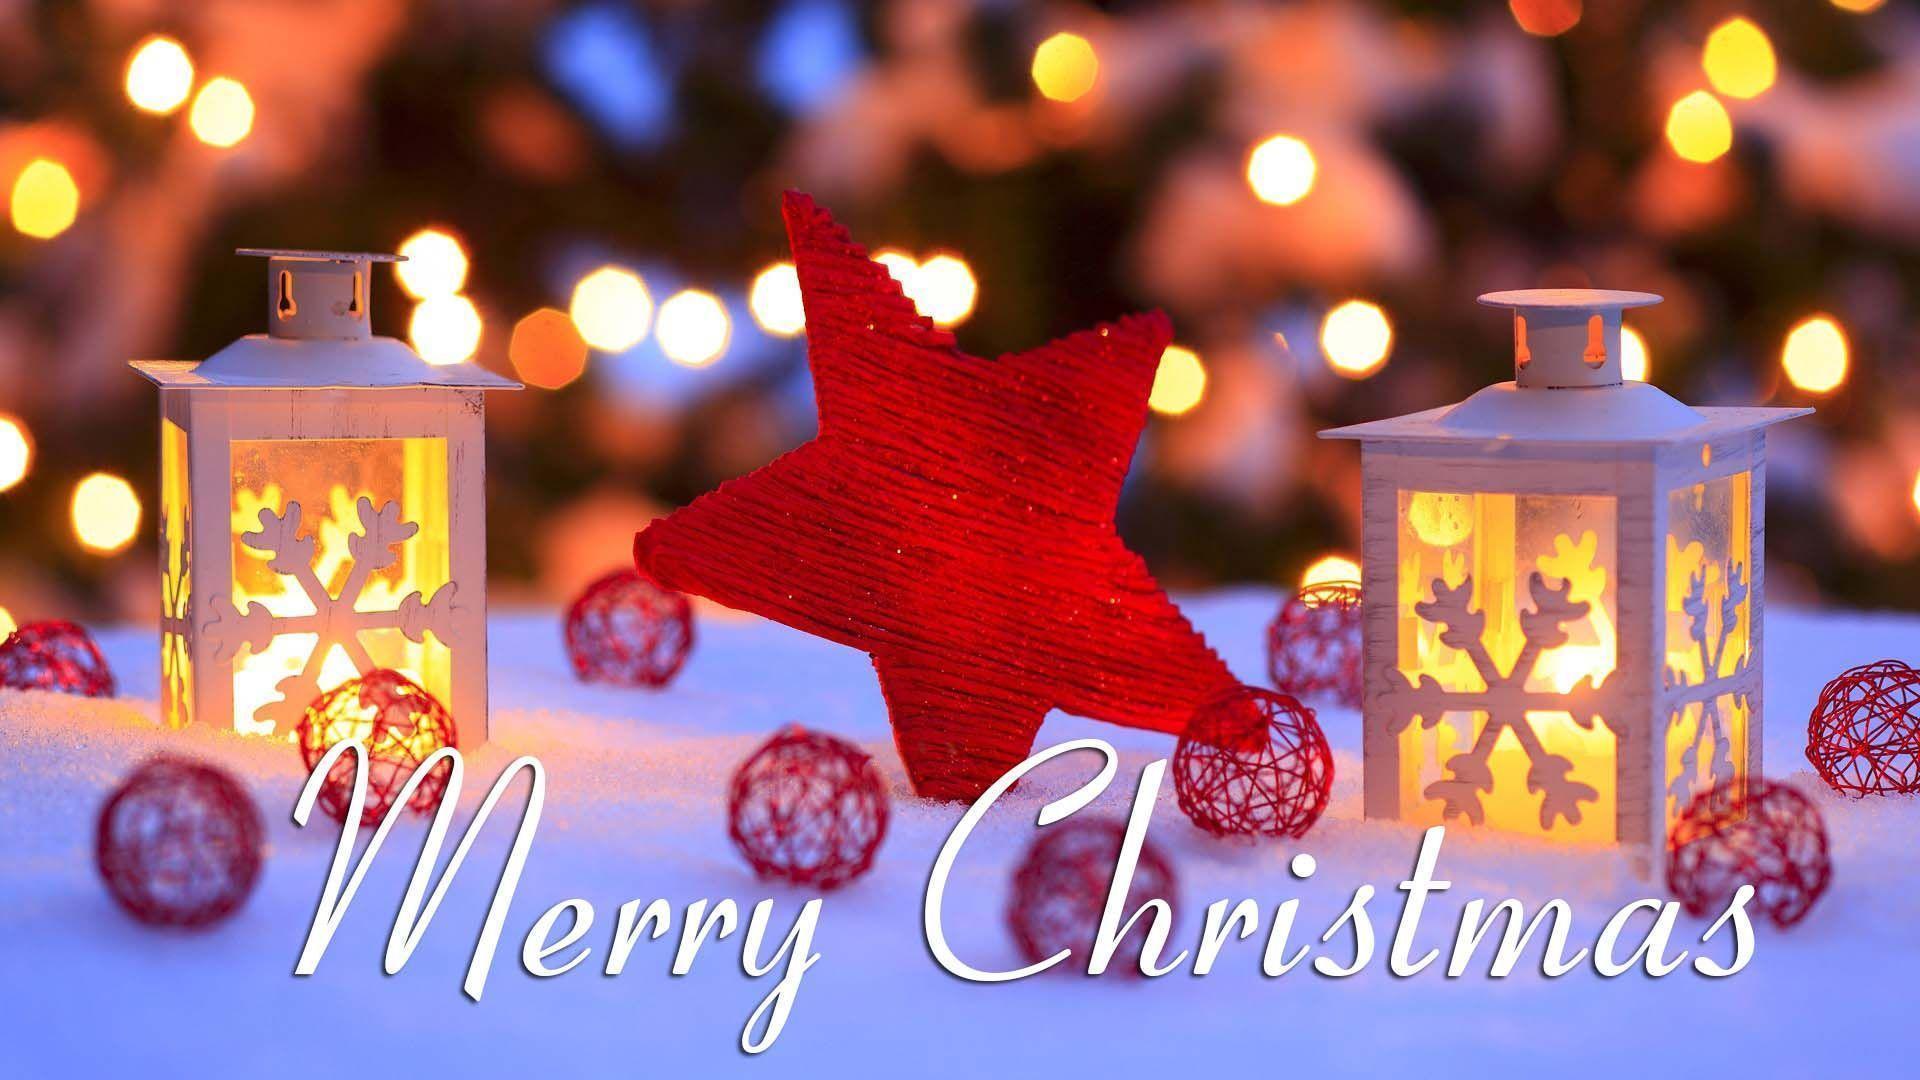 Merry Xmas 2015 Best HD Image. Wallpaper. Best Quotes & Wishes